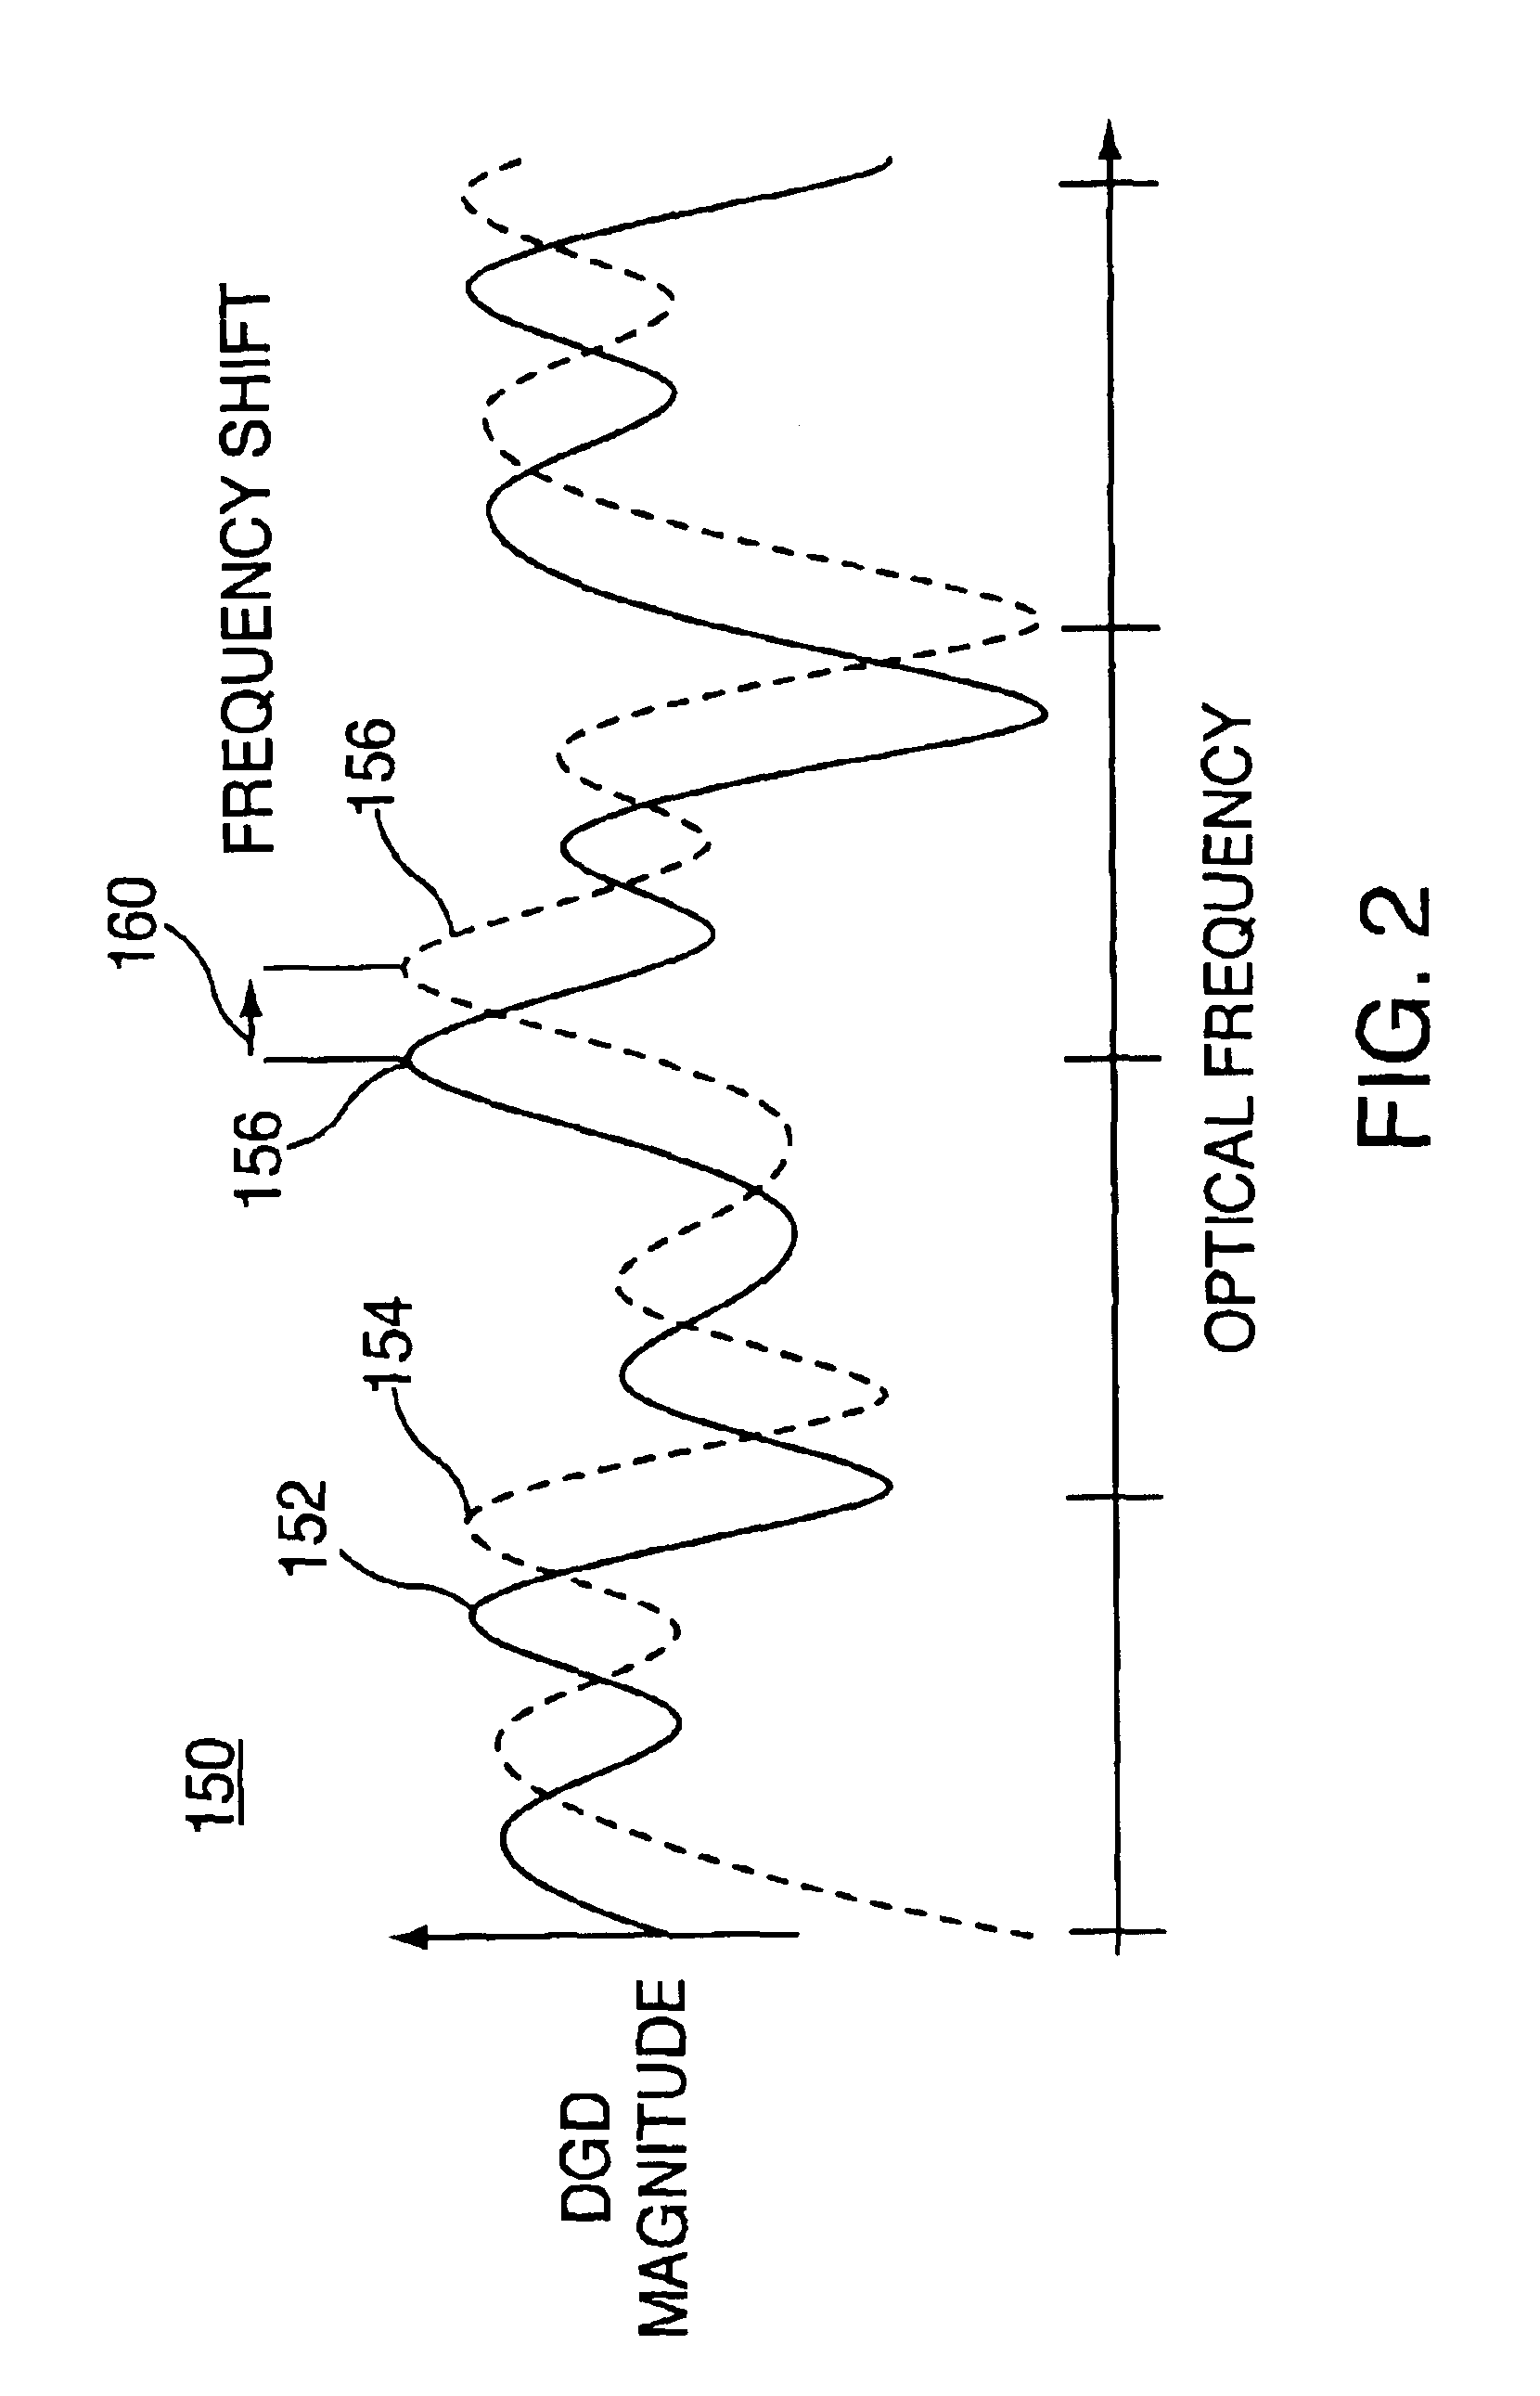 Methods and apparatus for frequency shifting polarization mode dispersion spectra